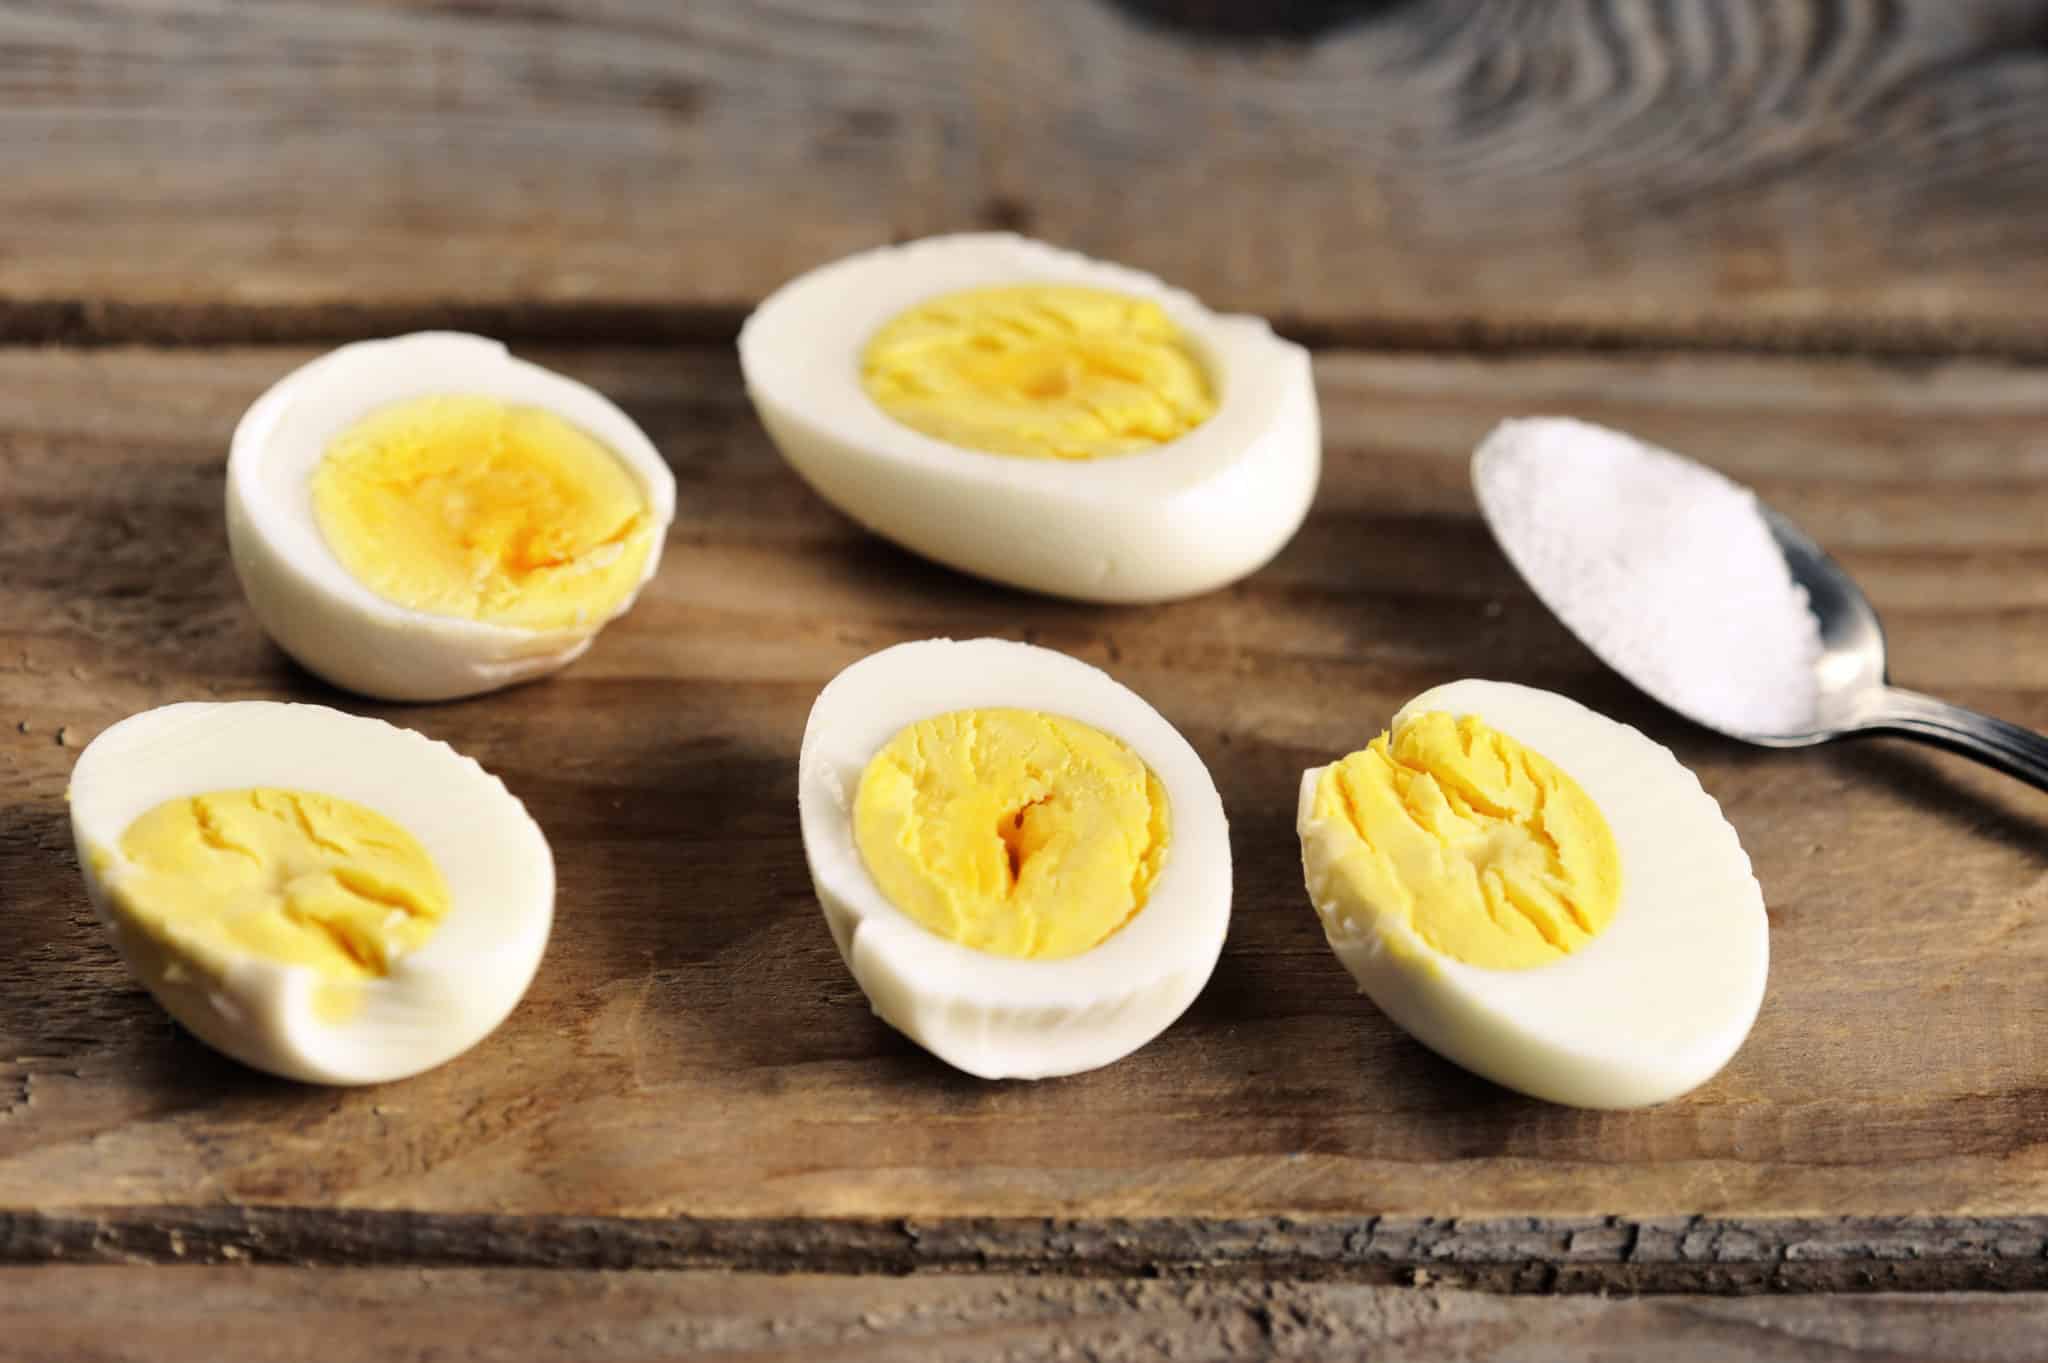 Hard boiled eggs cut in half on wooden table